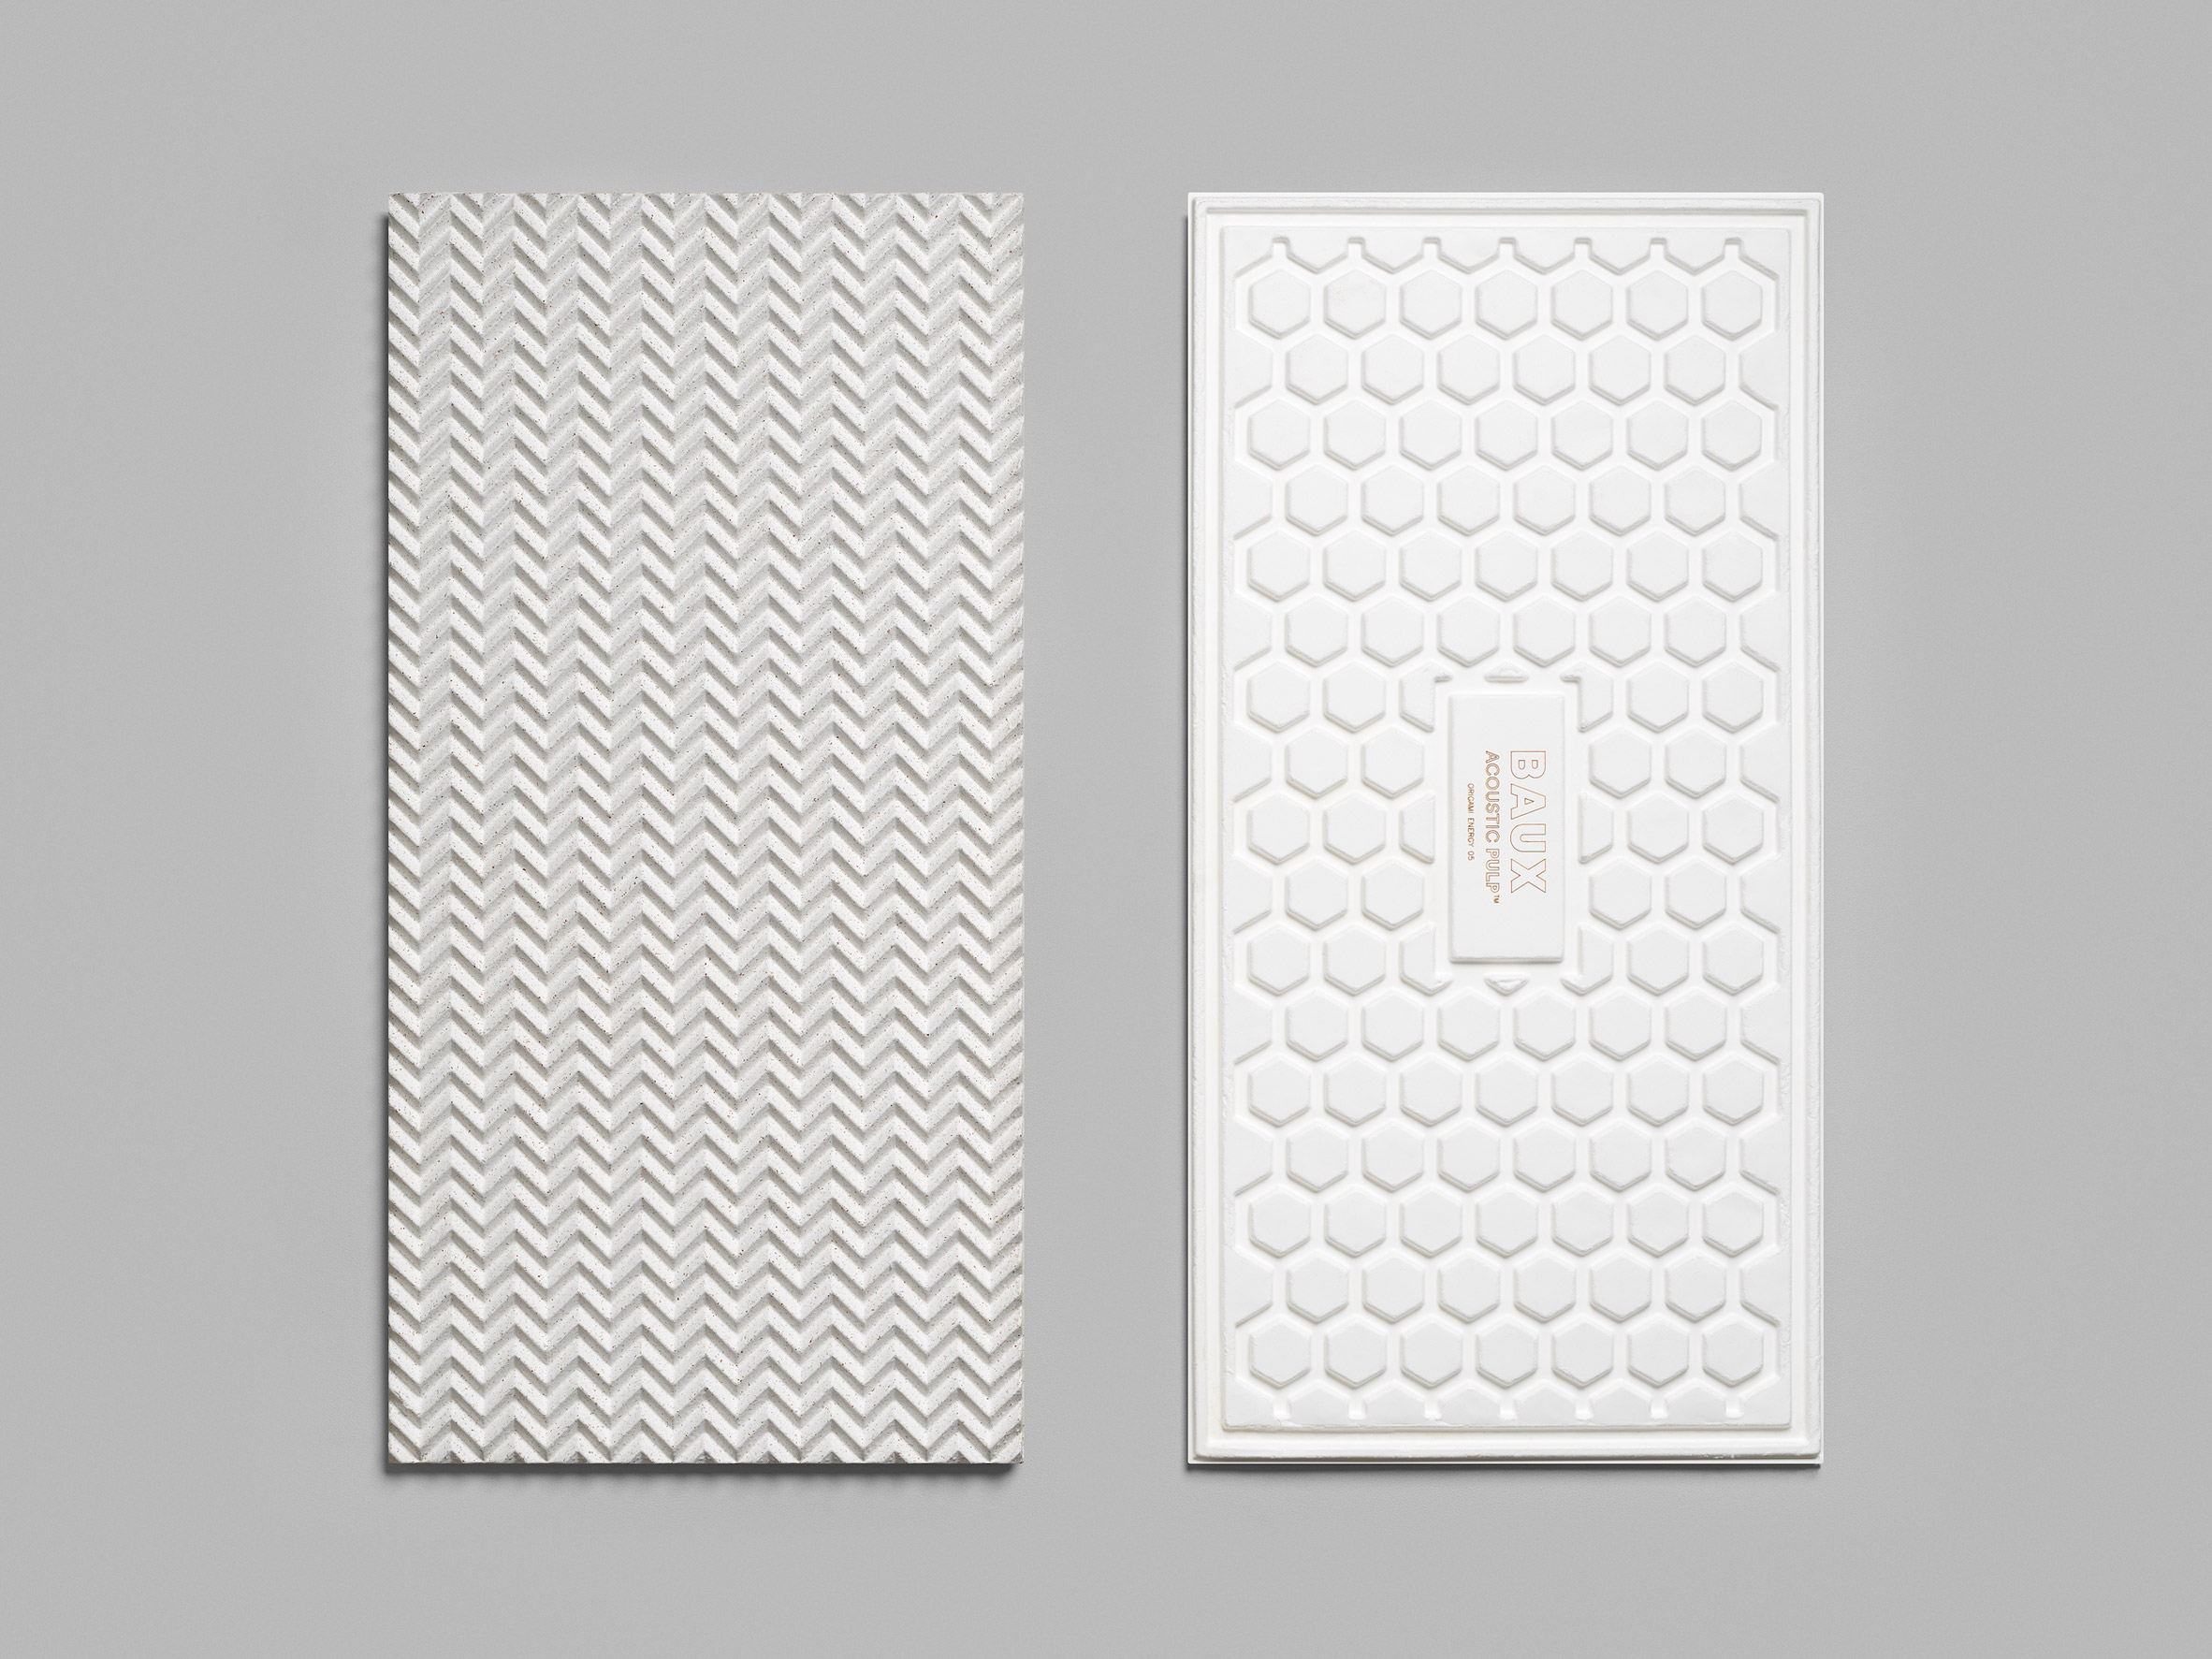 Bio-based acoustic pulp panels, created by Form Us With love in collaboration with BAUX. 